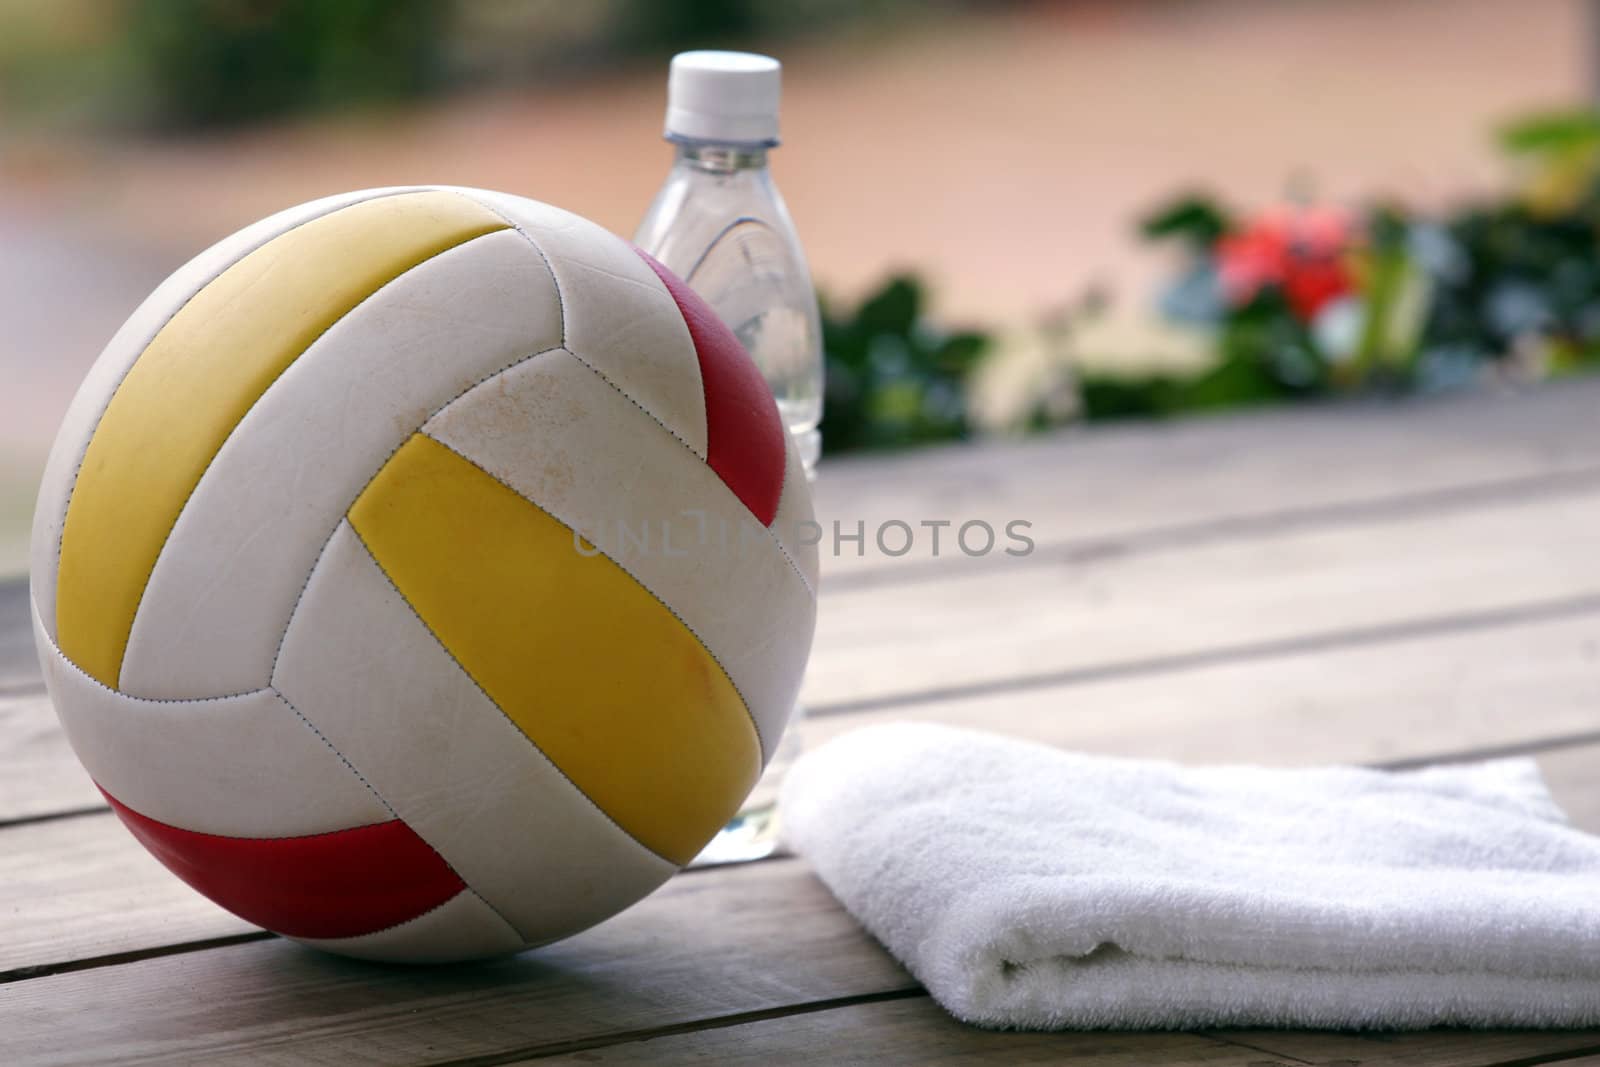 Volleyball, bottle water and towel on the wooden ground